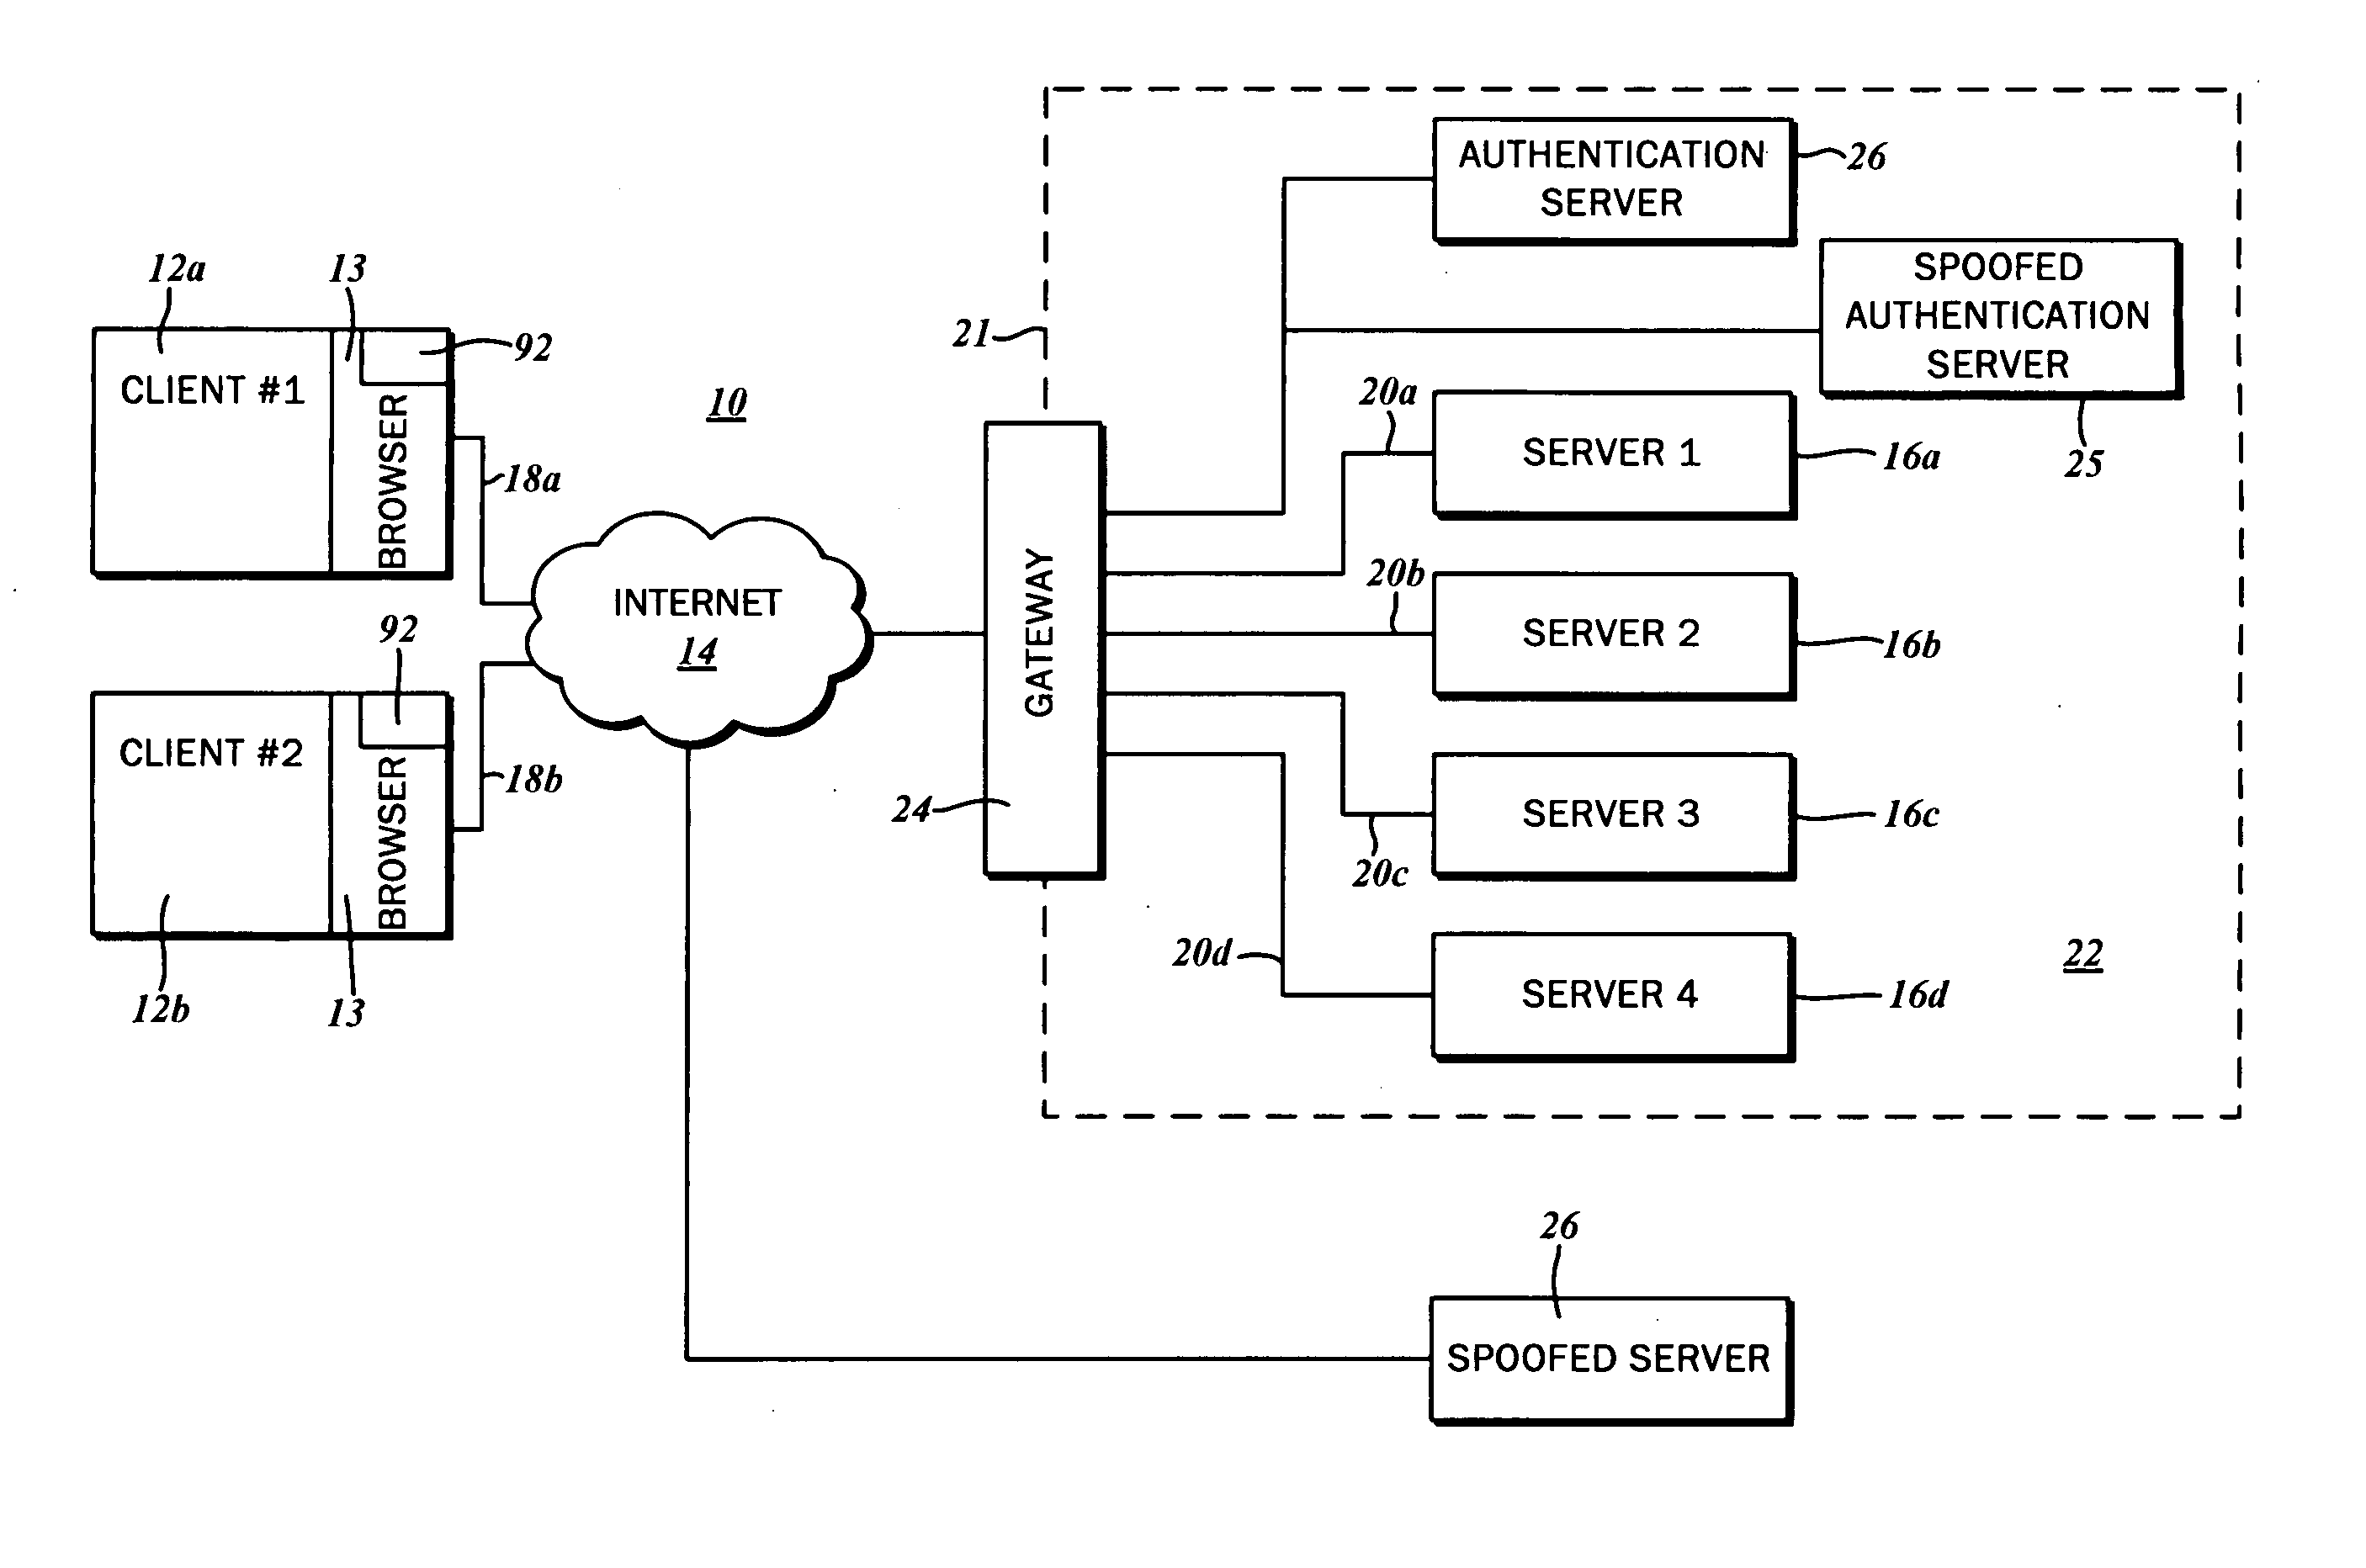 Method and system for secure online transactions with message-level validation